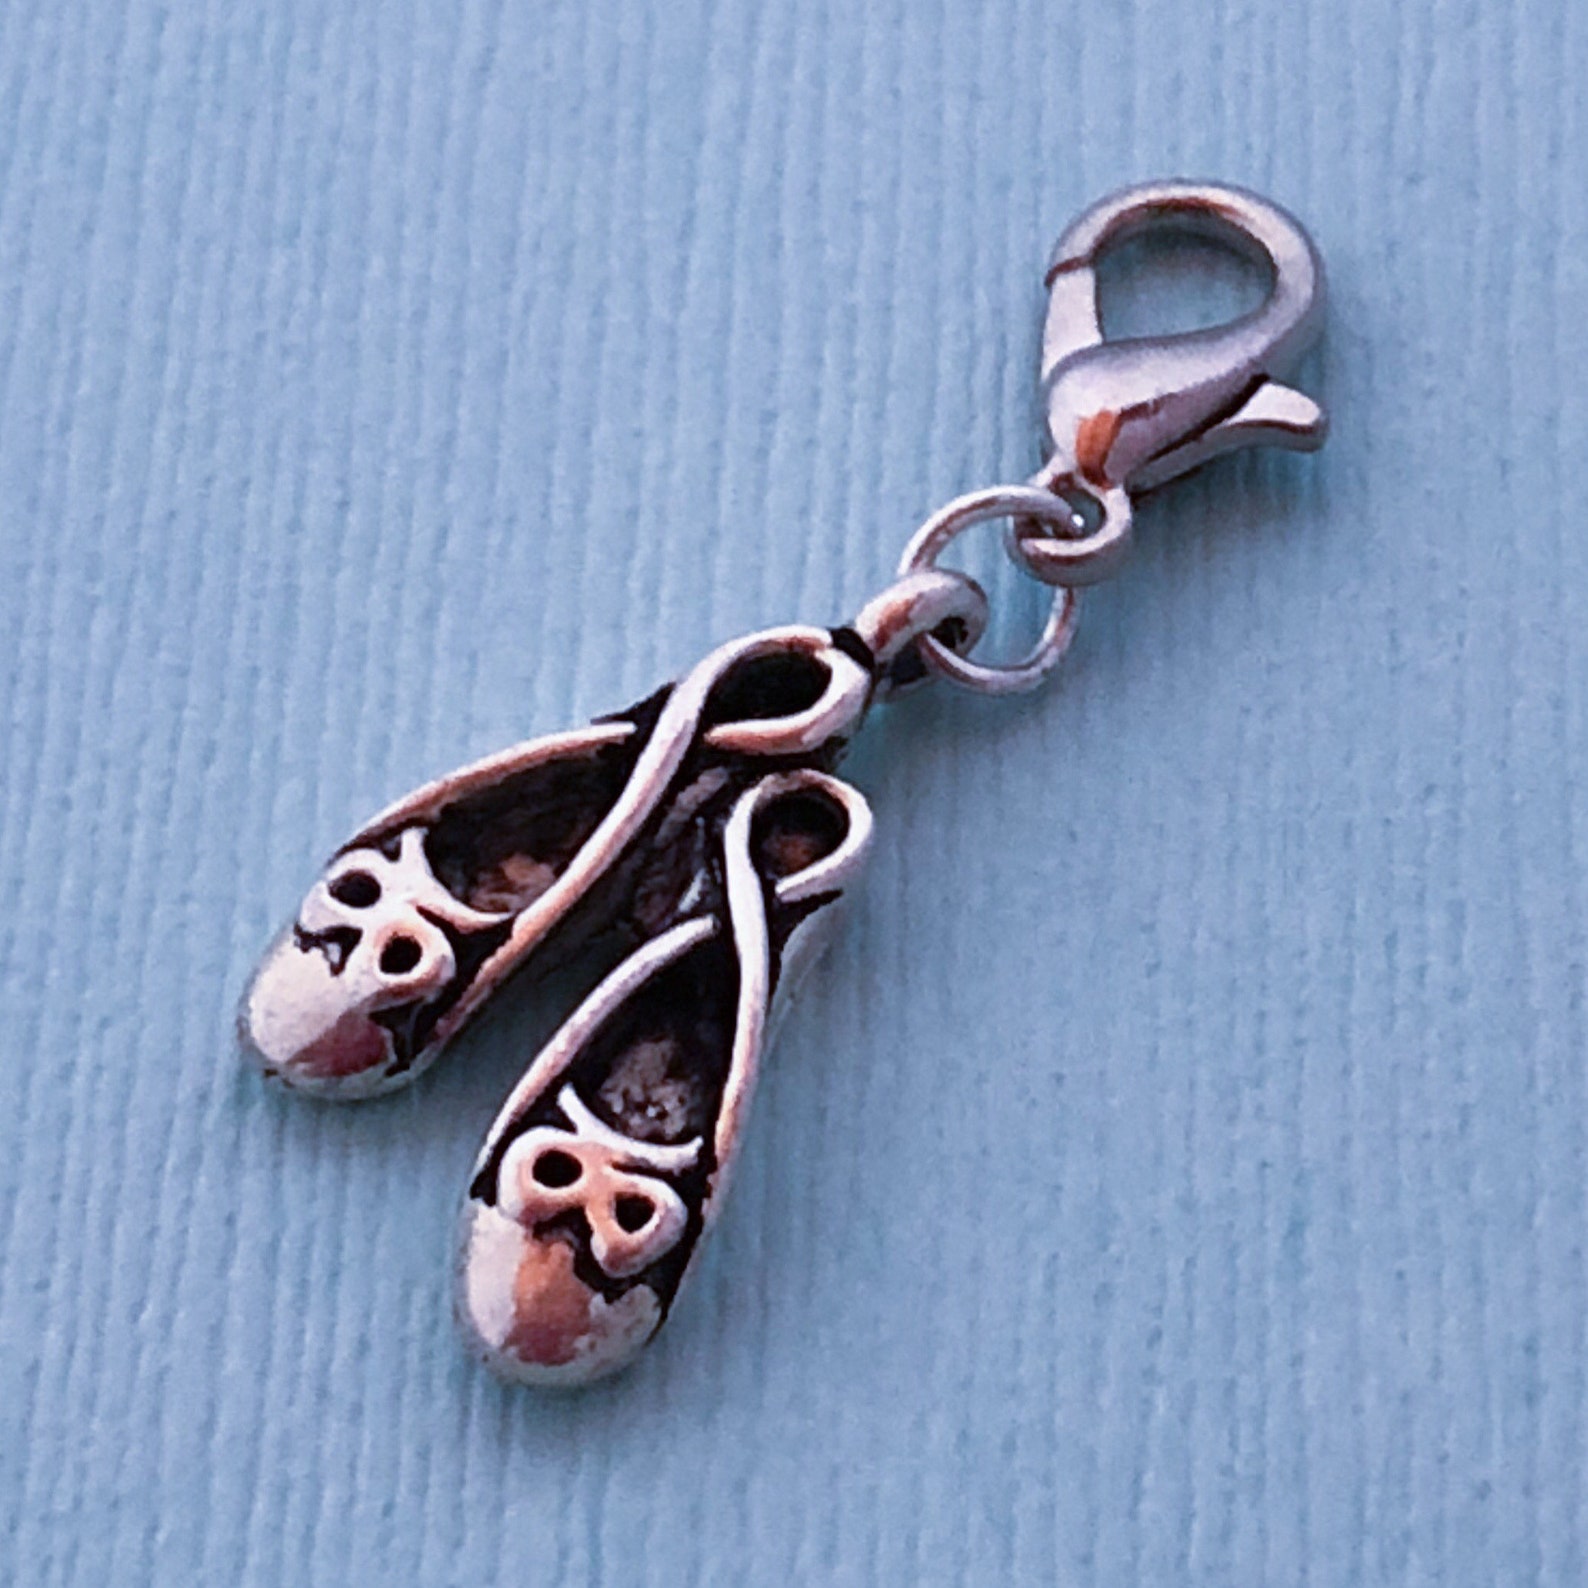 ballet shoes charm, add a charm